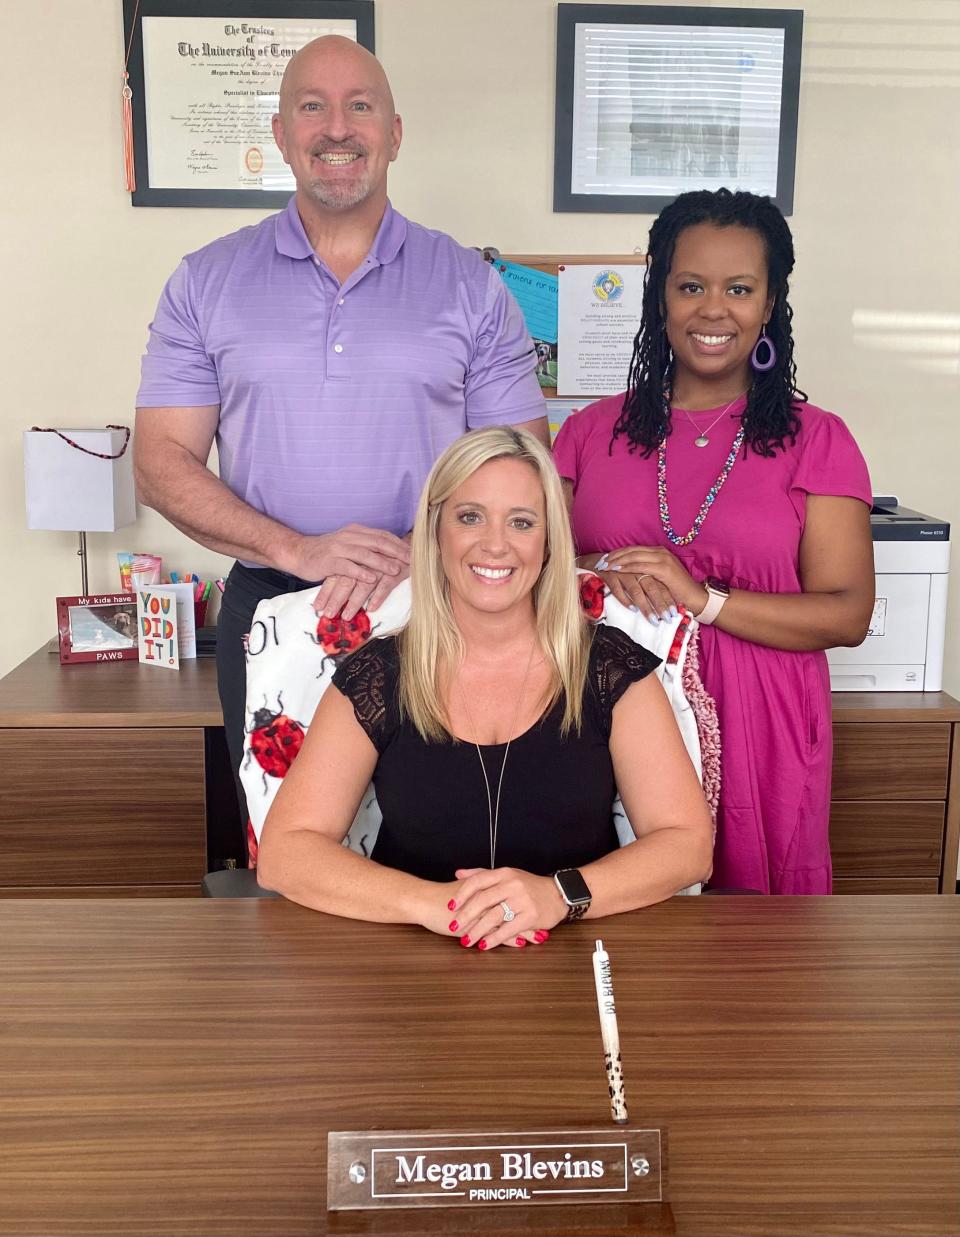 New Inskip Elementary School principal Megan Blevins (seated) will be working with assistant principals Matt Thompson and Katherine Mencer. 
August 2022